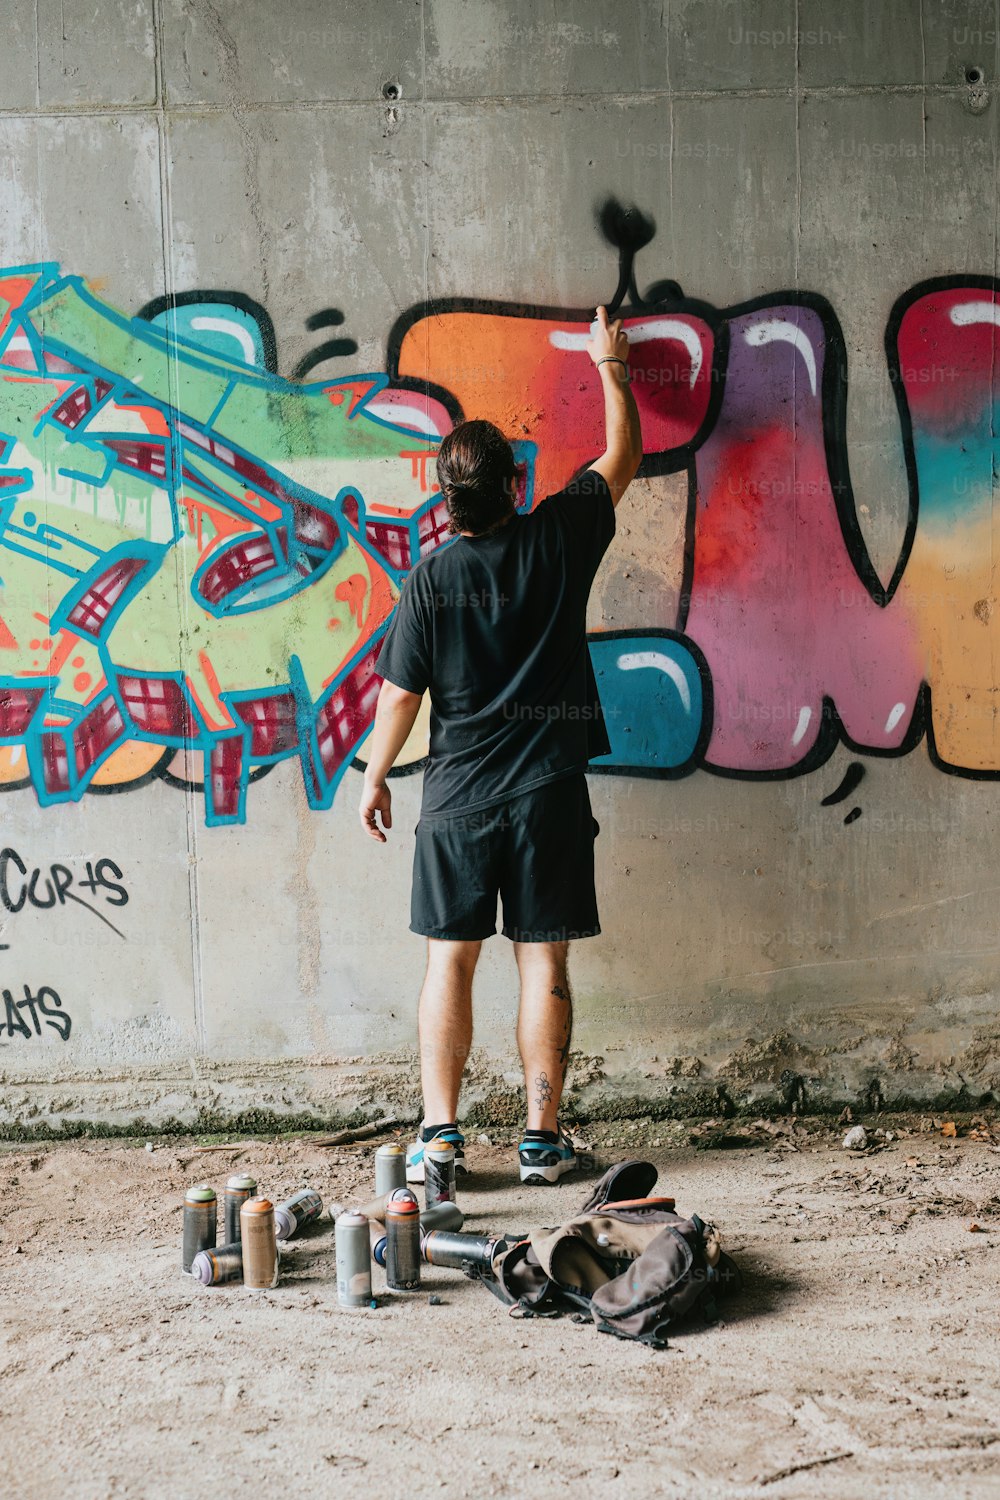 a man painting graffiti on a wall with roller skates